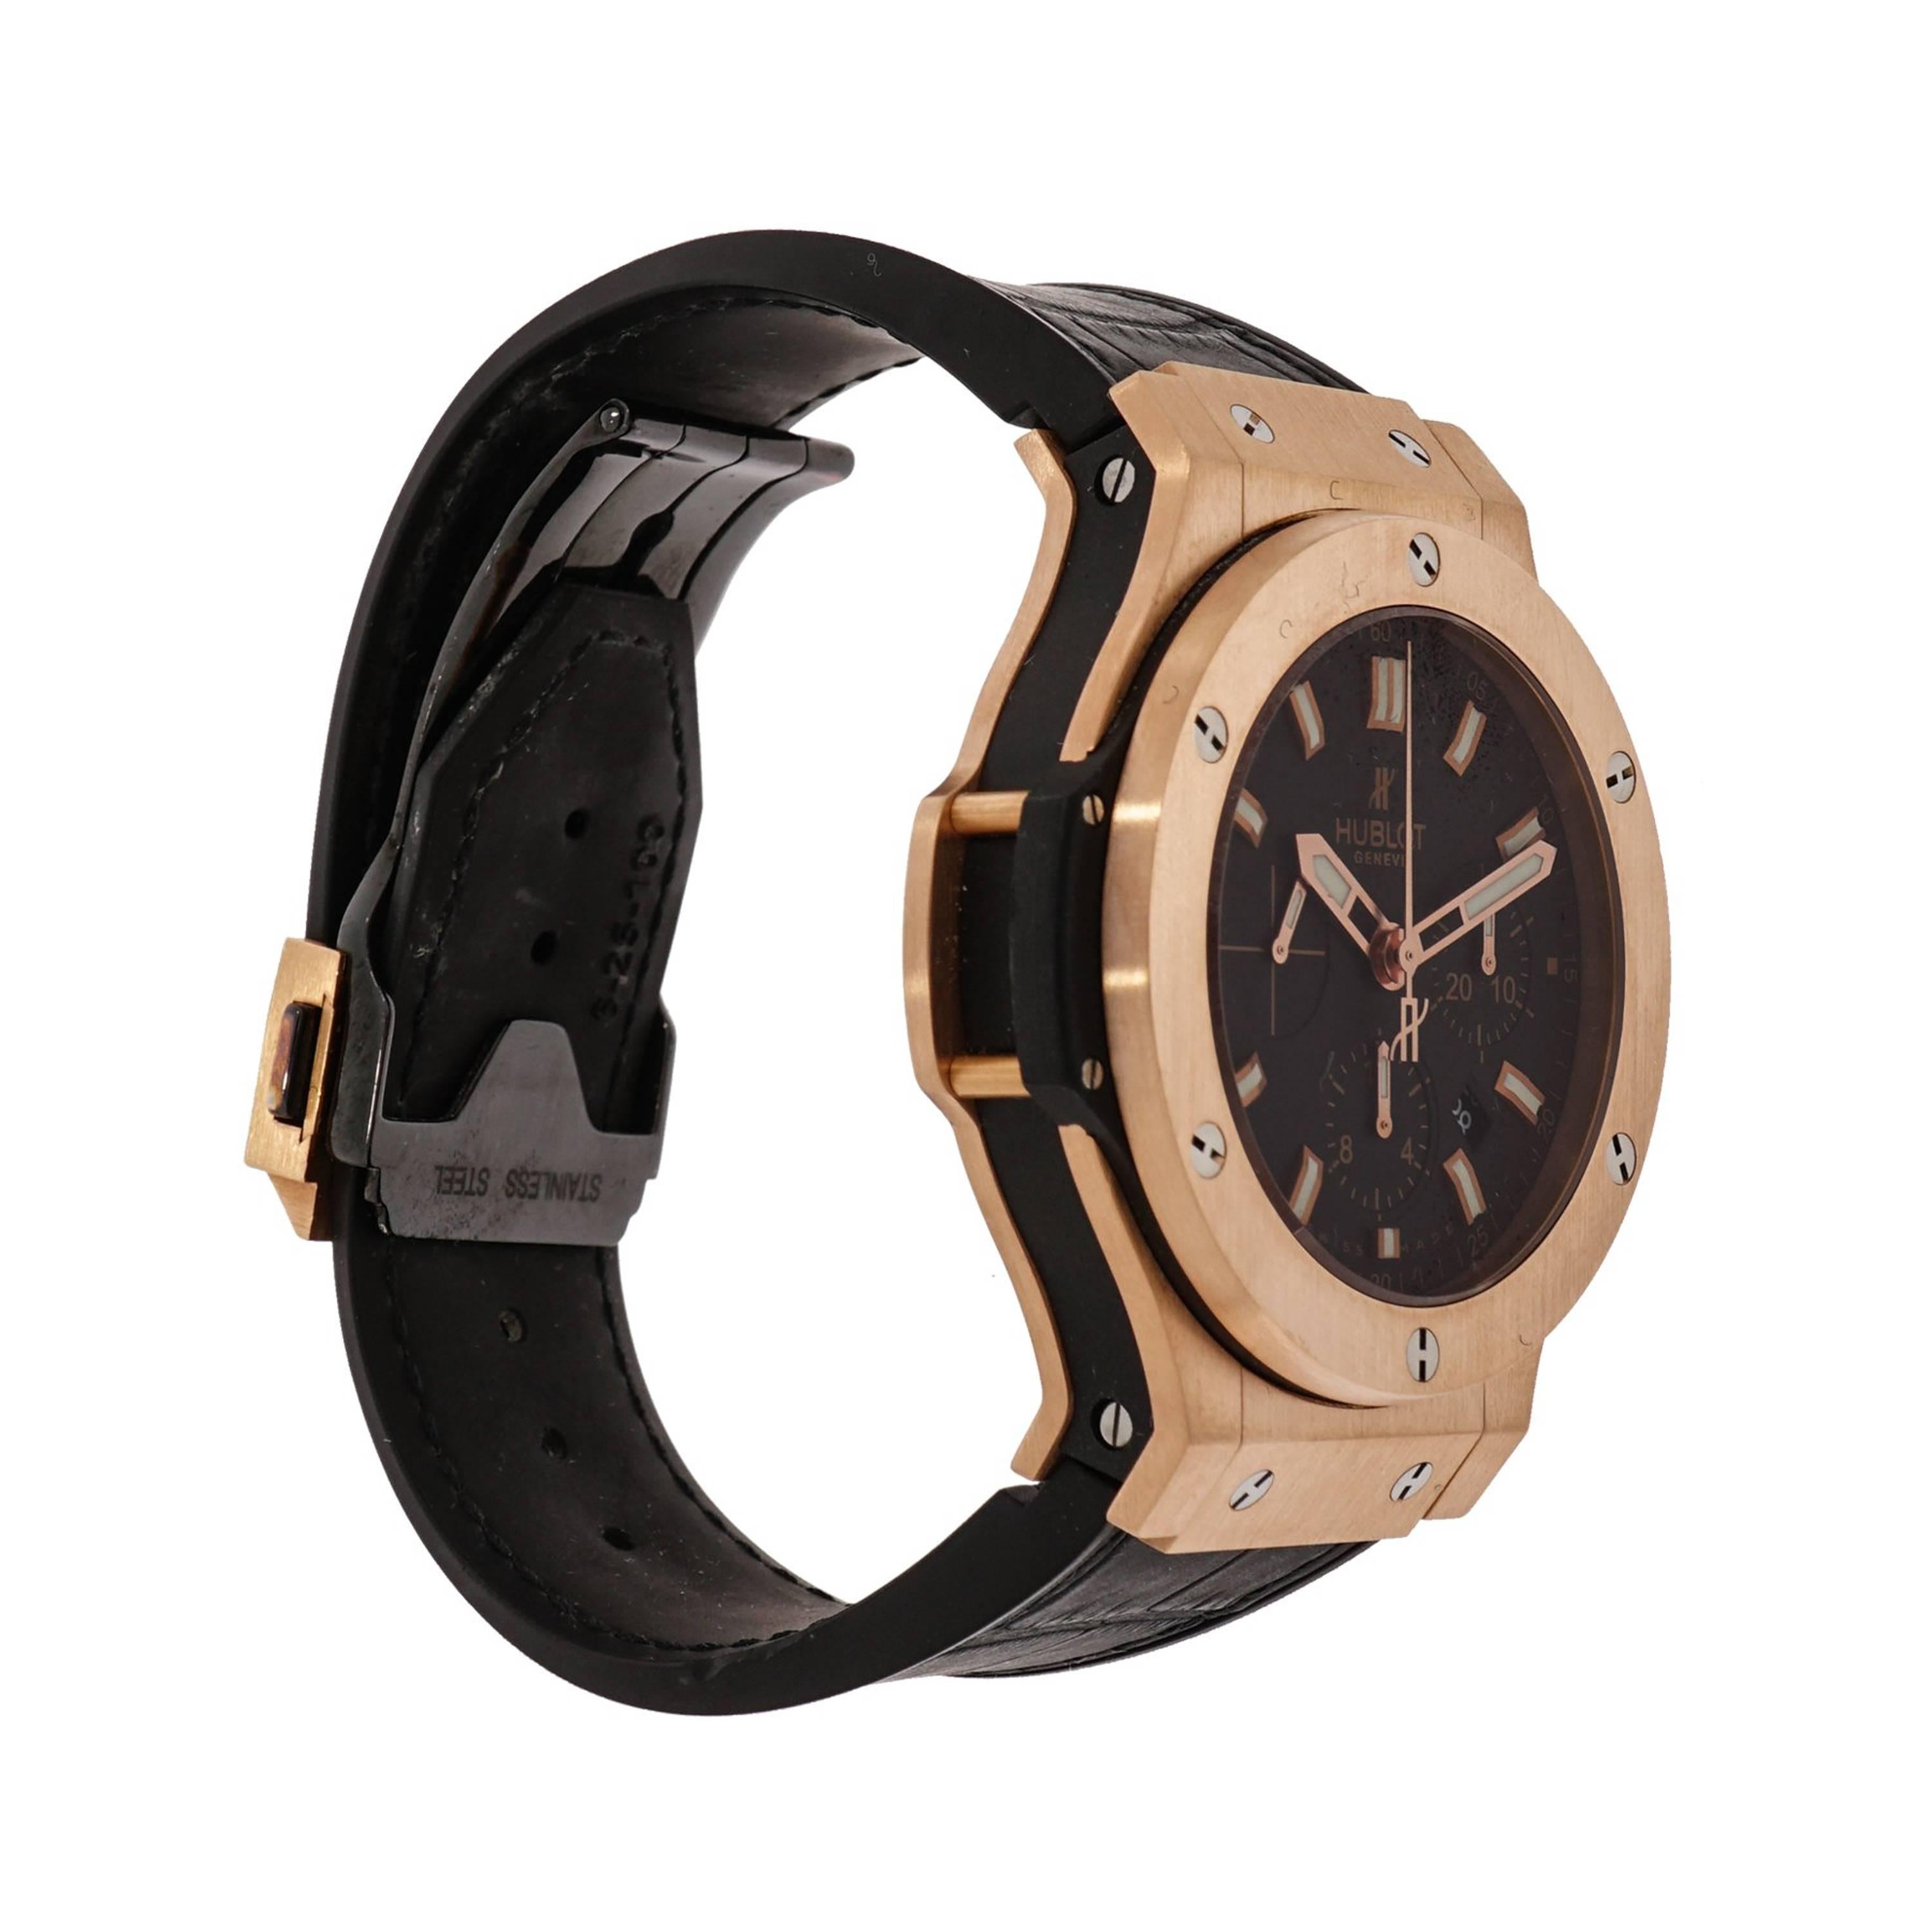 Hublot, a cutting edge and innovative design with quality craftsmanship to create satisfaction with every timepiece. This Hublot Big Bang Rose Gold Wristwatch features a self-winding movement with indications for the Hours, Minutes, Small Seconds,